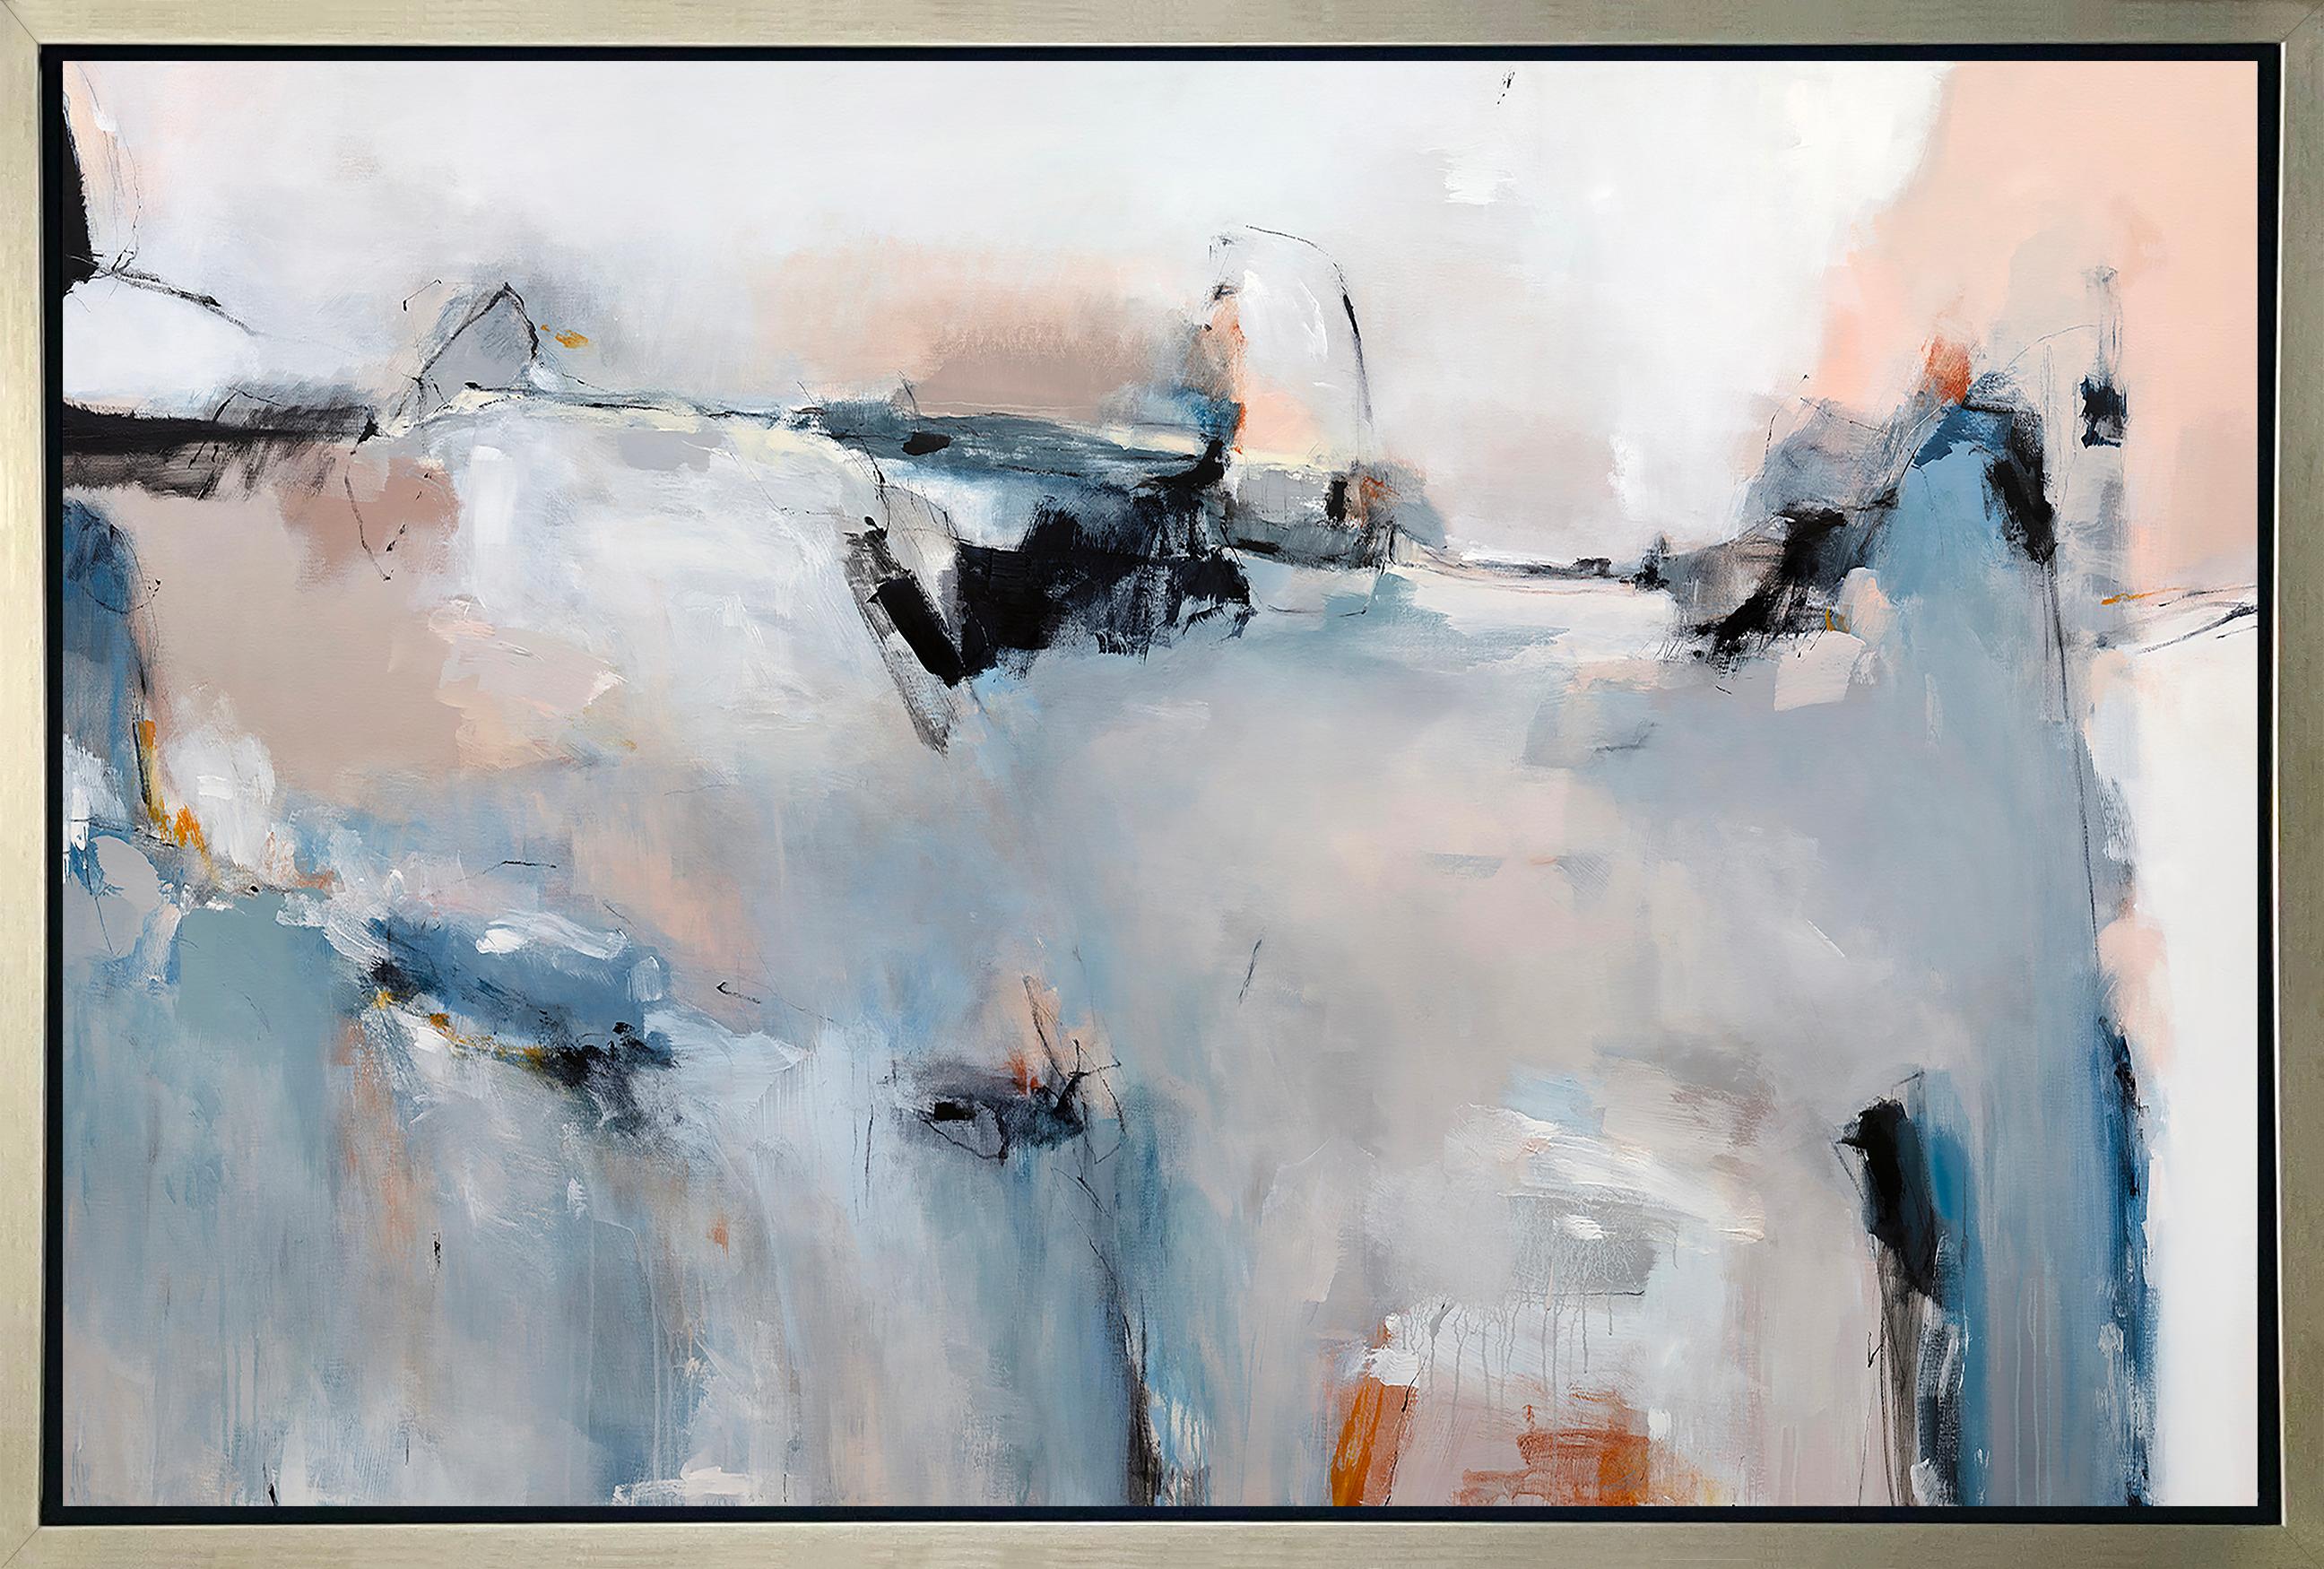 Kelly Rossetti Abstract Print - "Transparent Frontier, " Framed Limited Edition Giclee Print, 48" x 72"